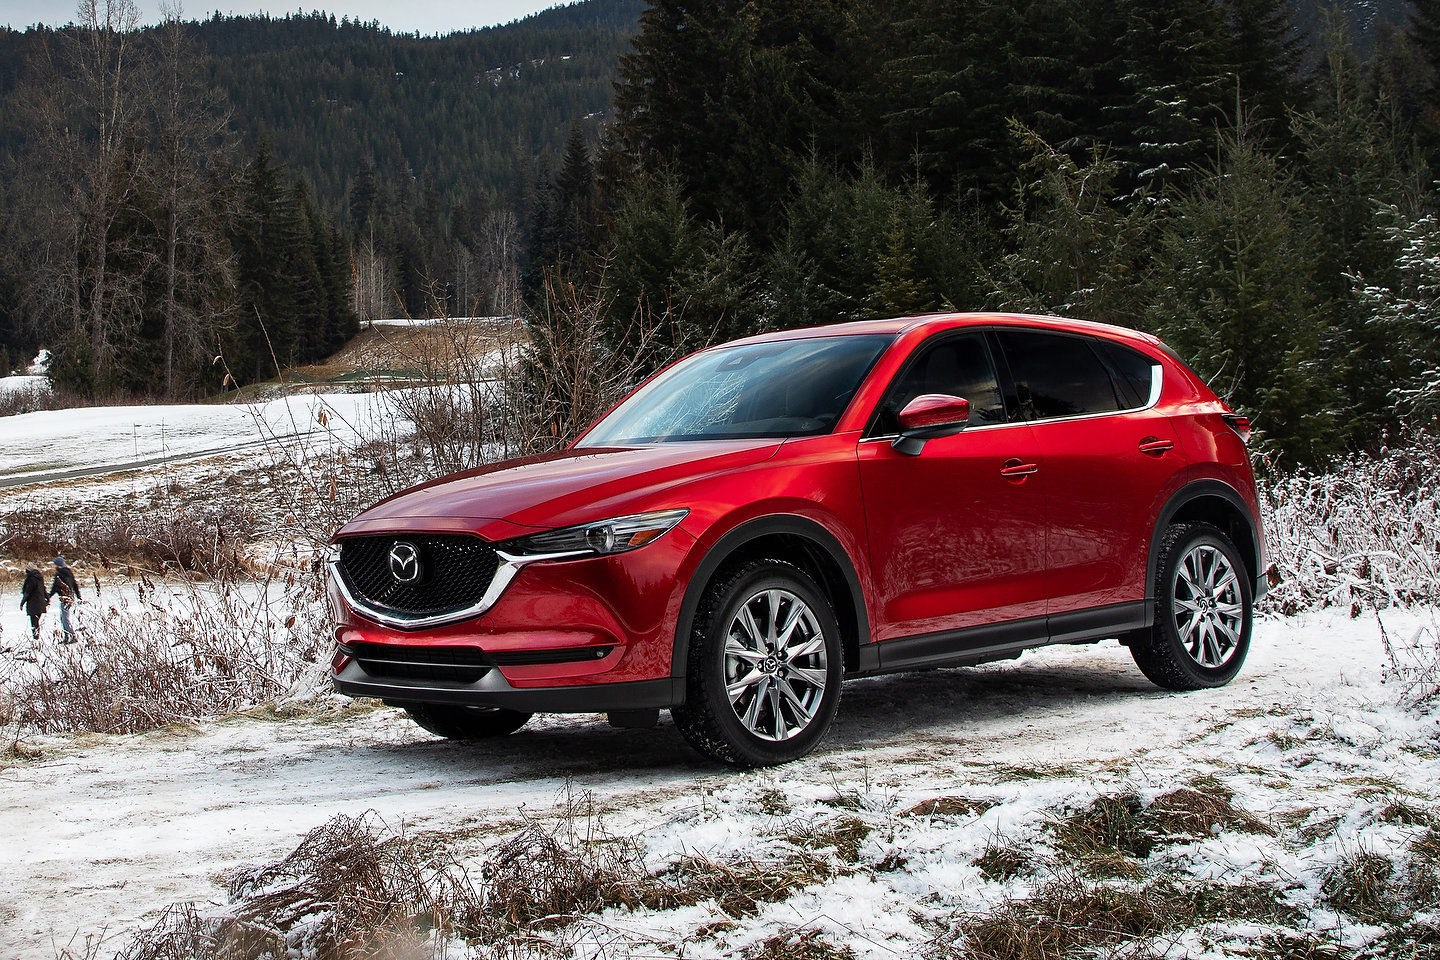 Three things to know about the 2019 Mazda CX-5